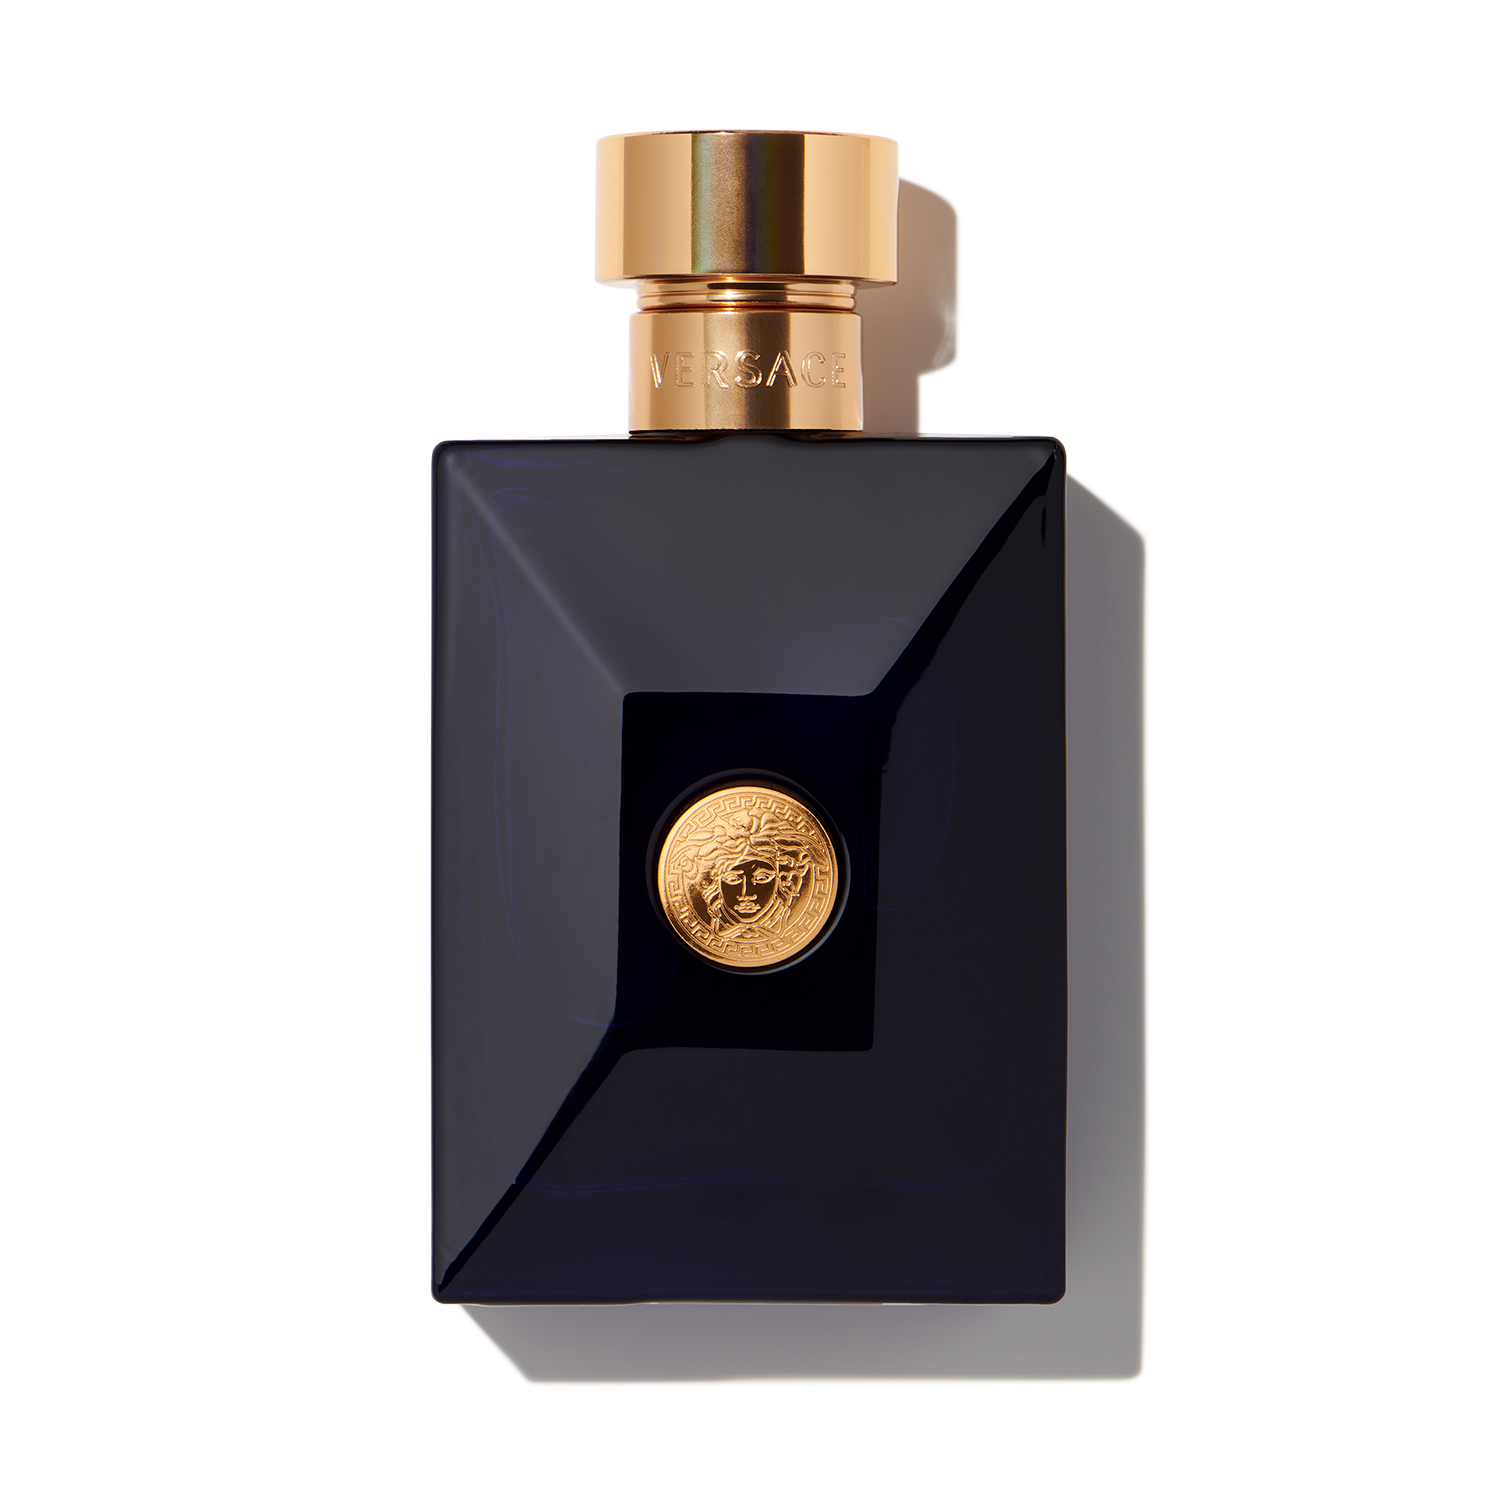 Get VERSACE Dylan Blue Pour Homme at Scentbird for $16.95